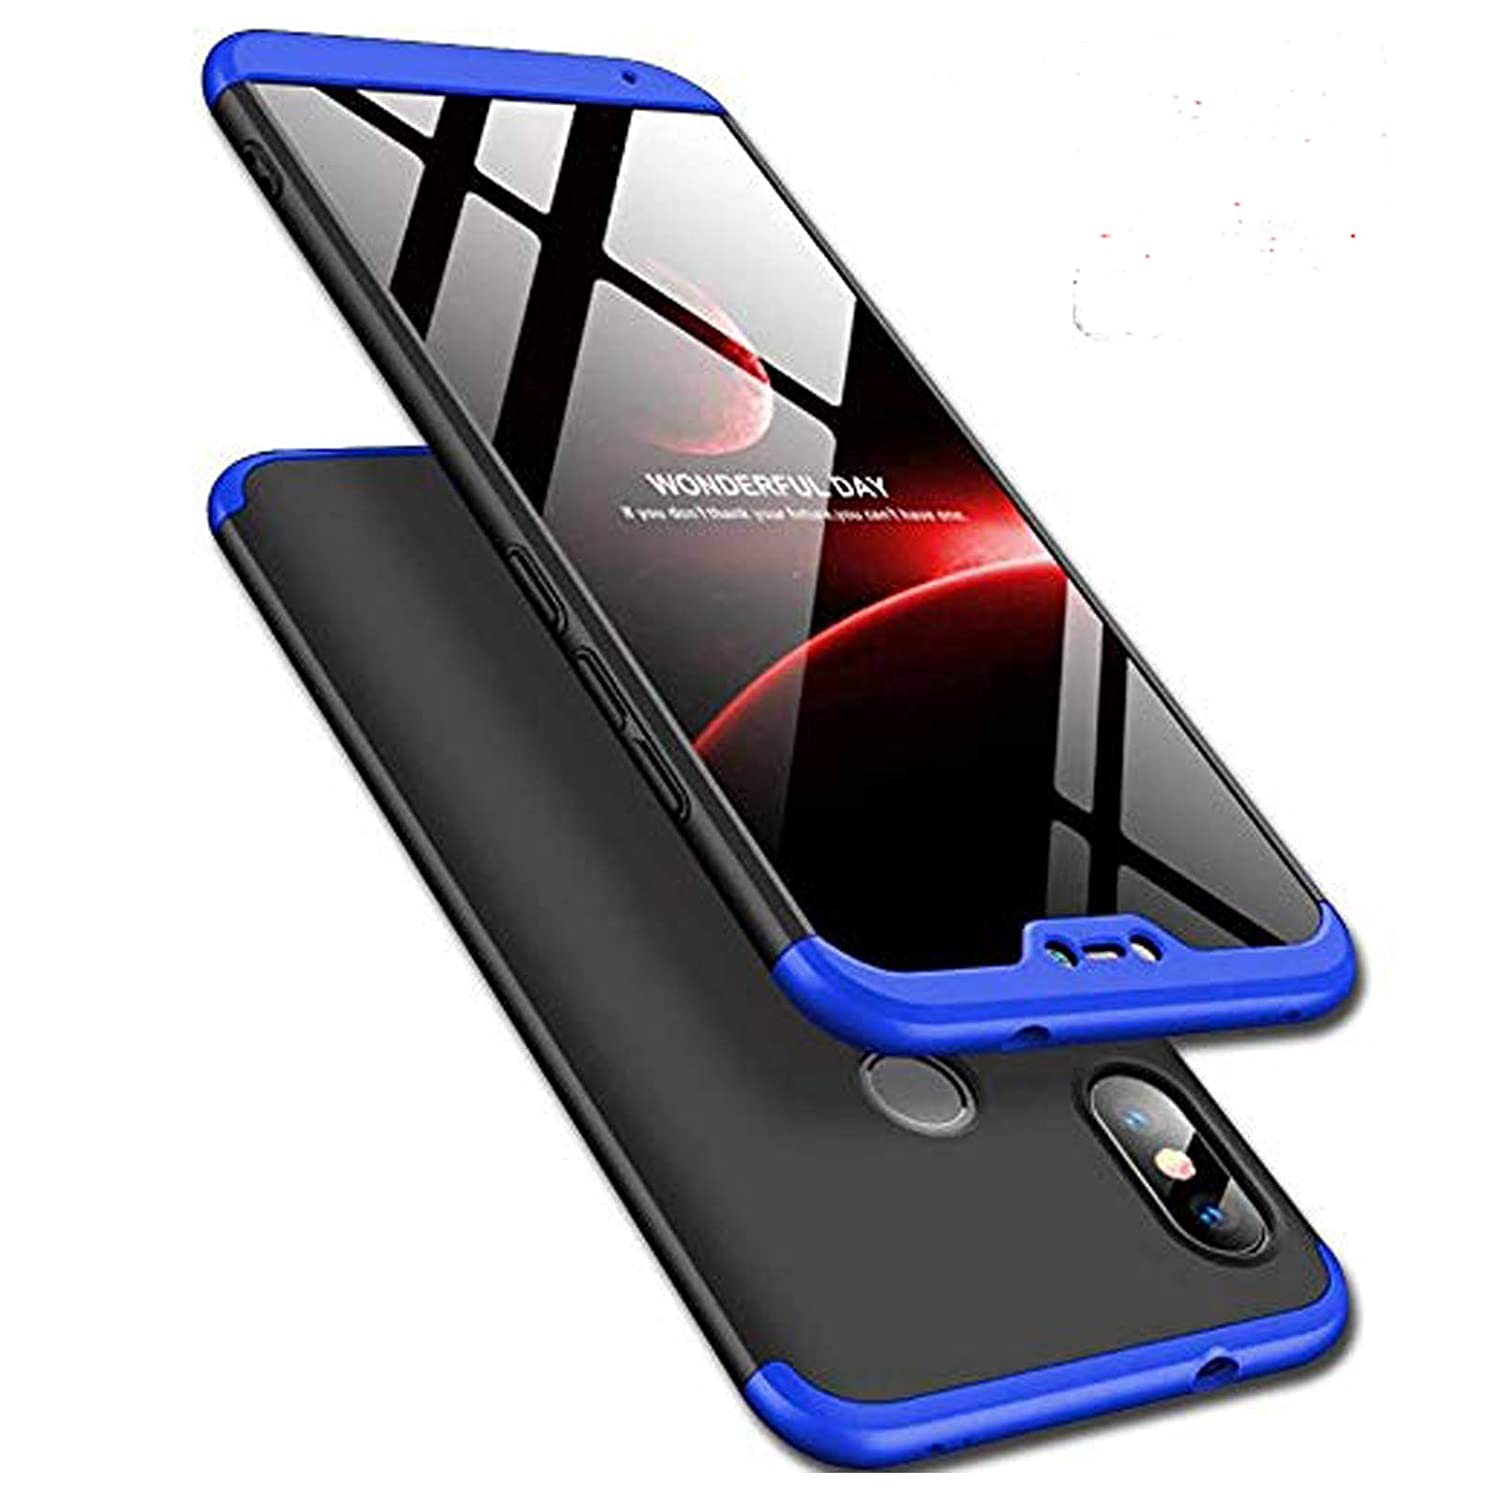 GKK Redmi 6 Pro Cases and Covers  3 in 1 Slim Fit, 360 Degree Protection, Shock Proof, Hybrid Design   Blue 